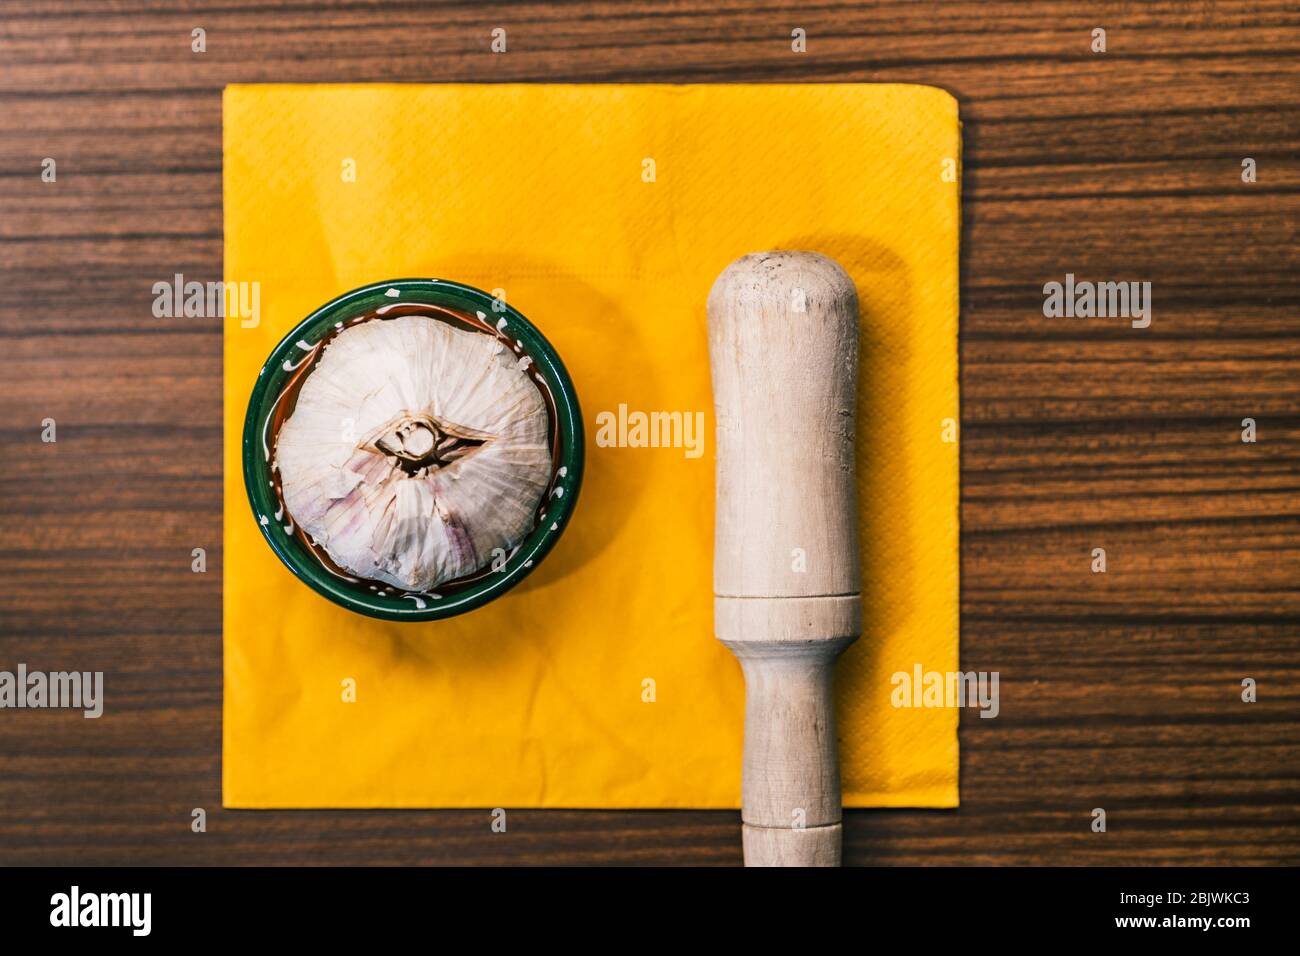 Garlic head next to a hand of mortar on top of a traditional style wooden countertop. Preparing a garlic recipe for making aioli. Stock Photo